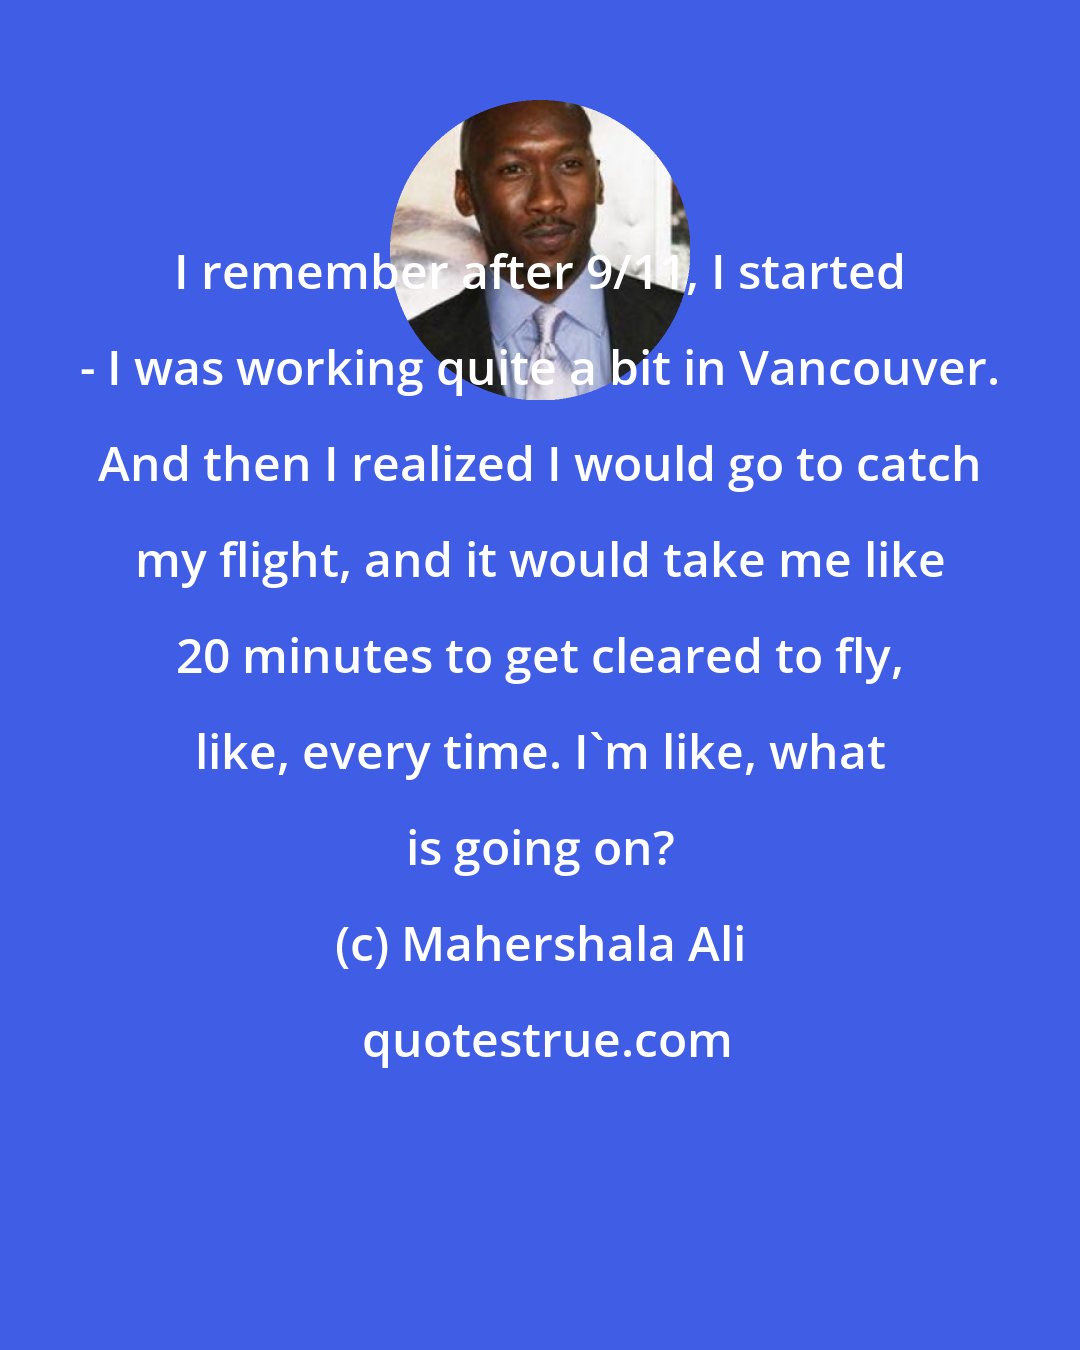 Mahershala Ali: I remember after 9/11, I started - I was working quite a bit in Vancouver. And then I realized I would go to catch my flight, and it would take me like 20 minutes to get cleared to fly, like, every time. I'm like, what is going on?